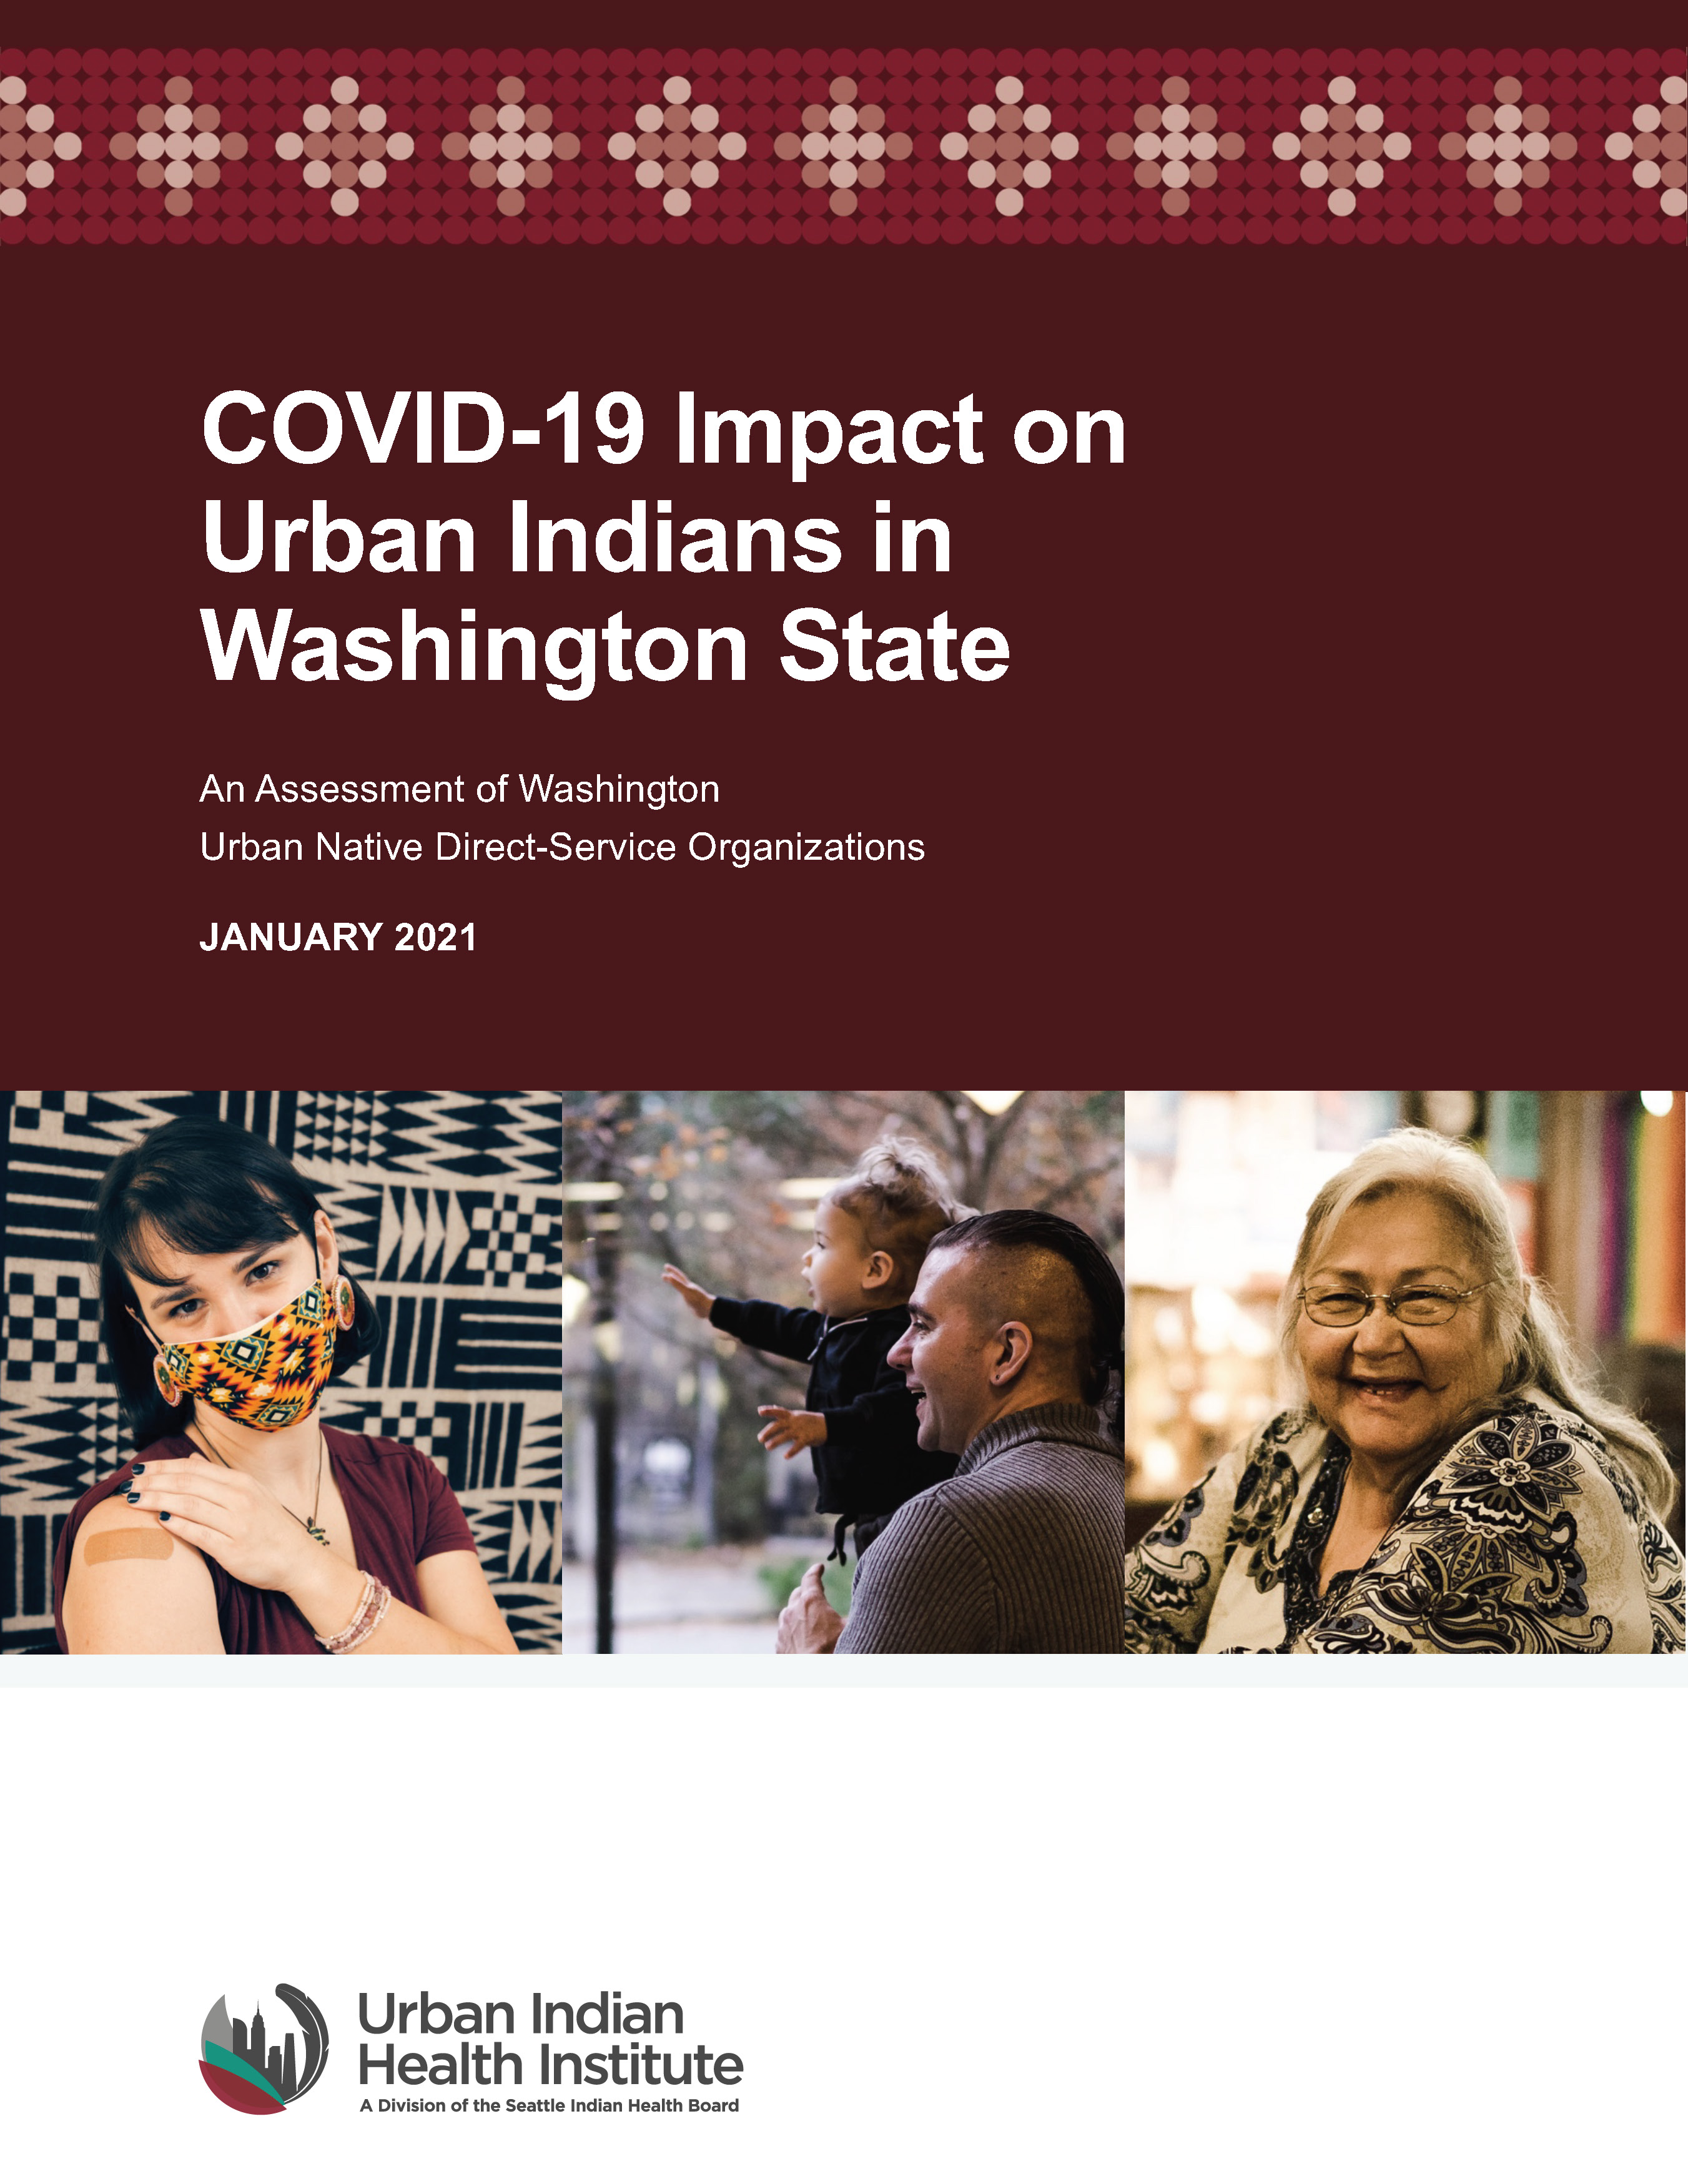 COVID-19 Impact on Urban Indians in Washington State